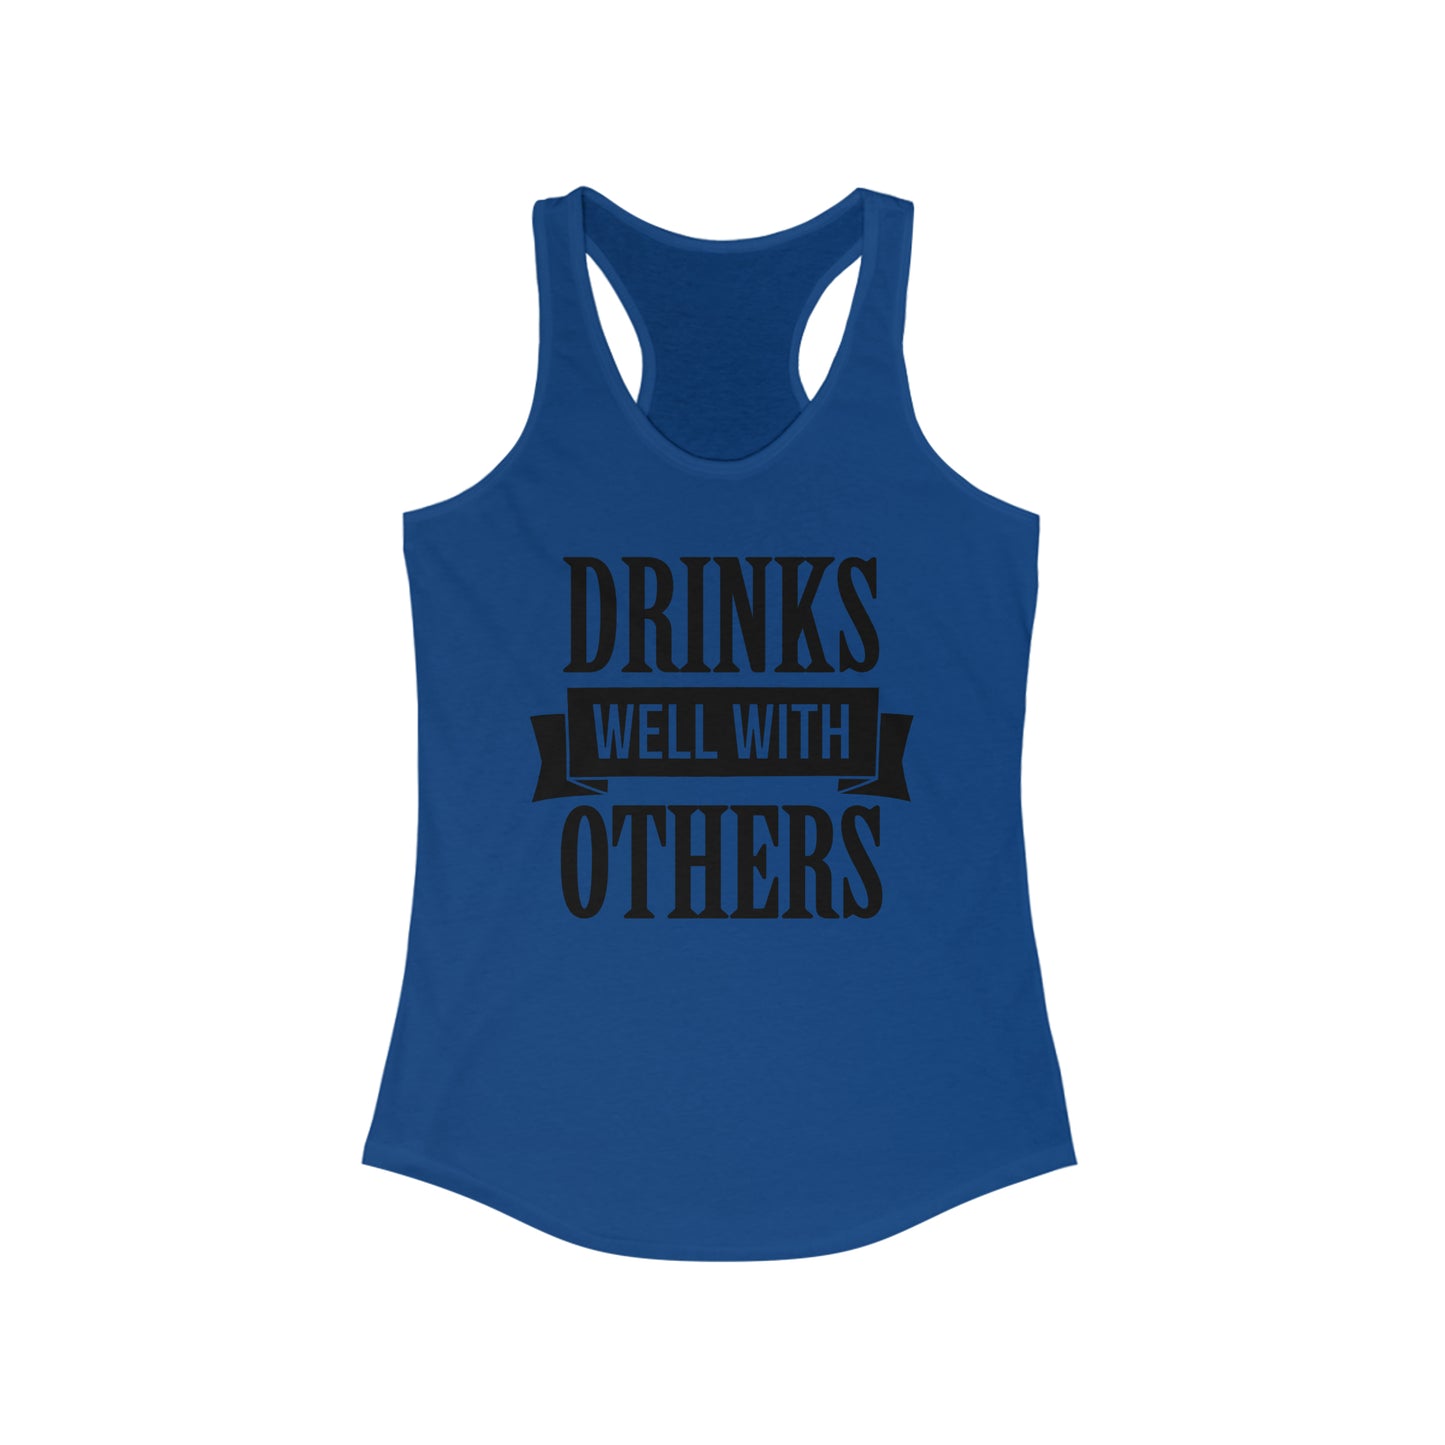 Drinks Well With Others Tank Top Women's Ideal Racerback Tank